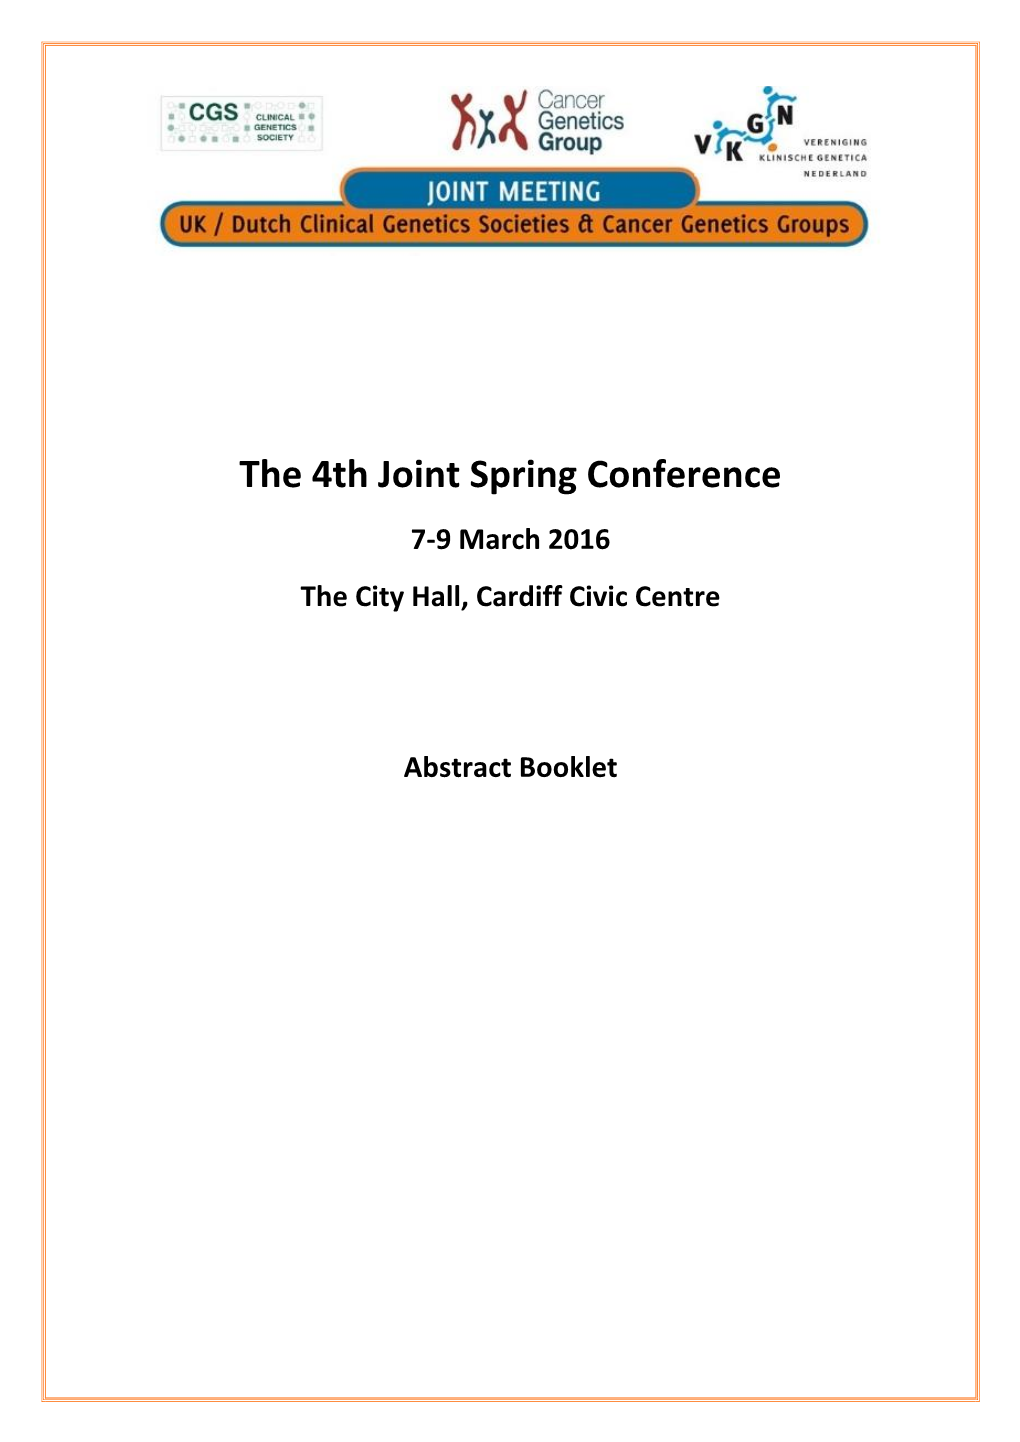 The 4Th Joint Spring Conference 7-9 March 2016 the City Hall, Cardiff Civic Centre